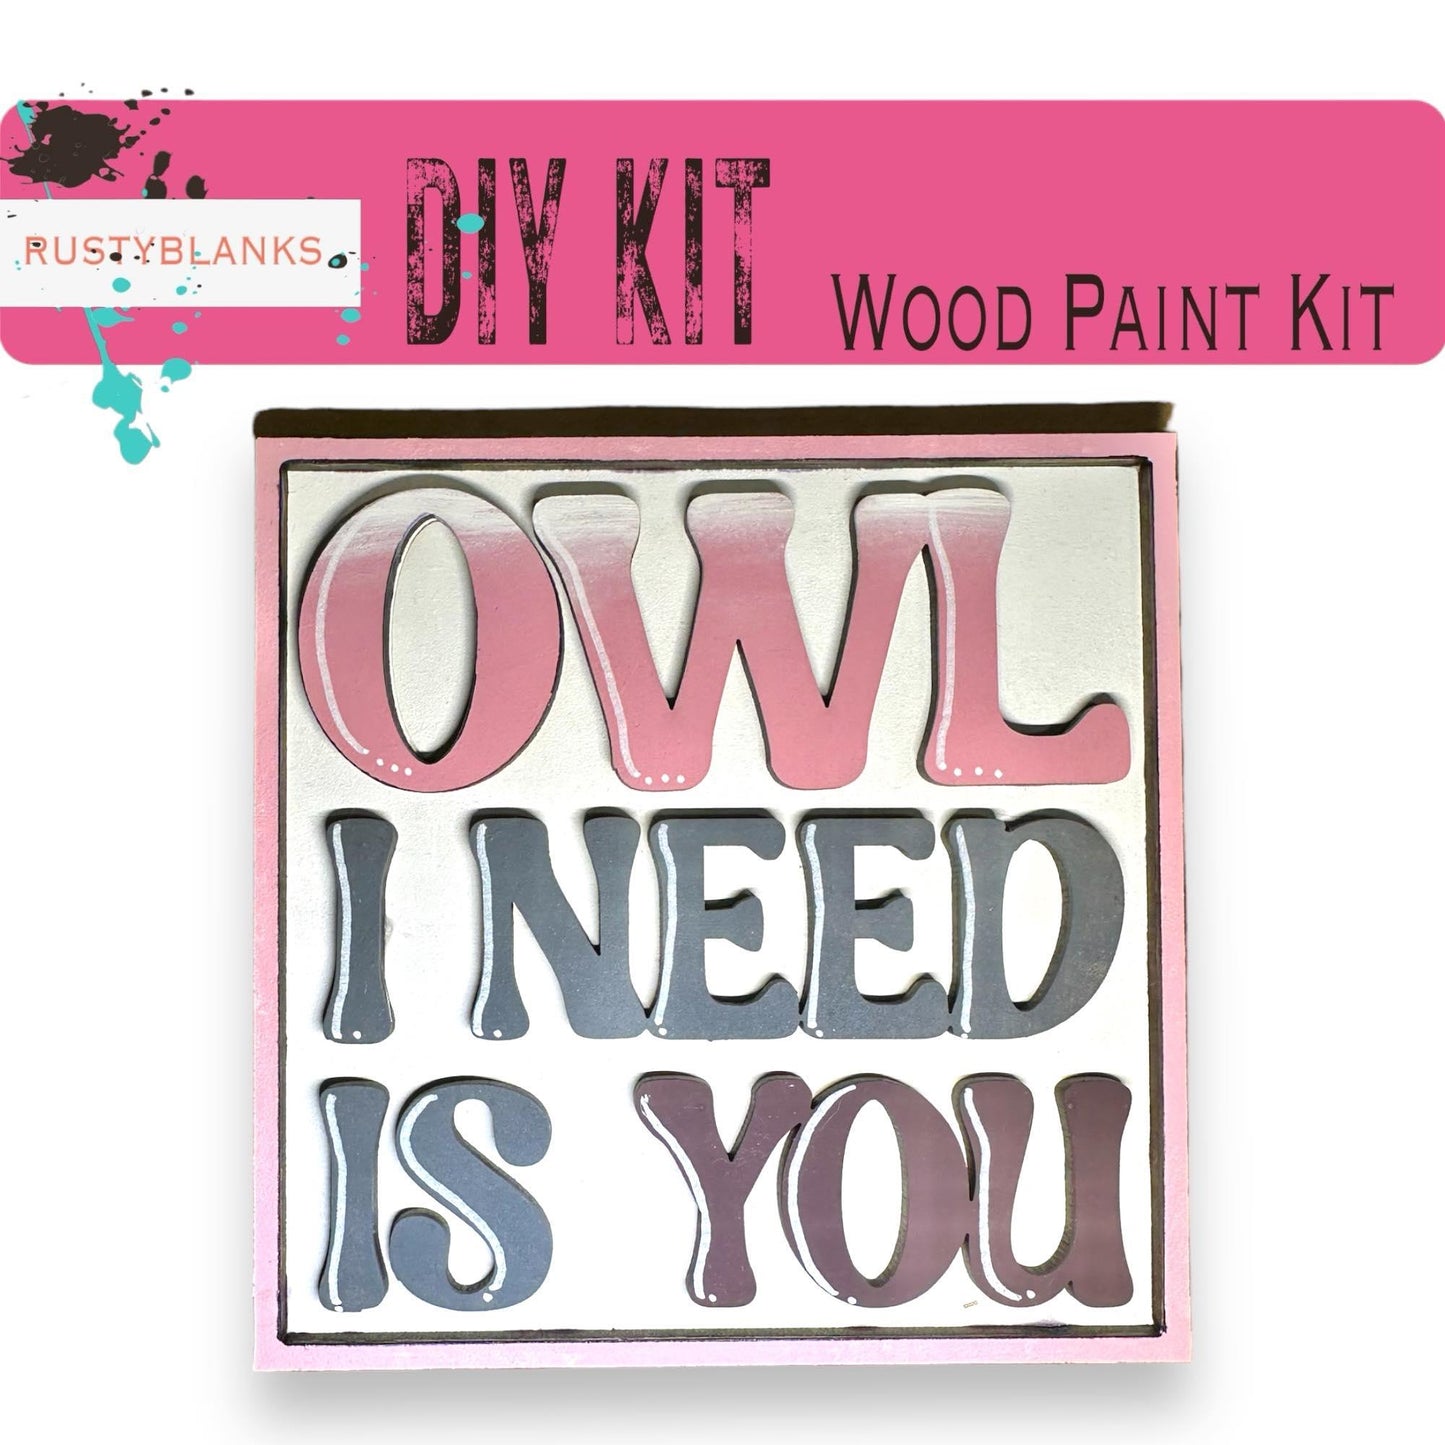 Valentine's Interchangeable Owl Love You Tiles for leaning ladders or Shelf Sitters - RusticFarmhouseDecor